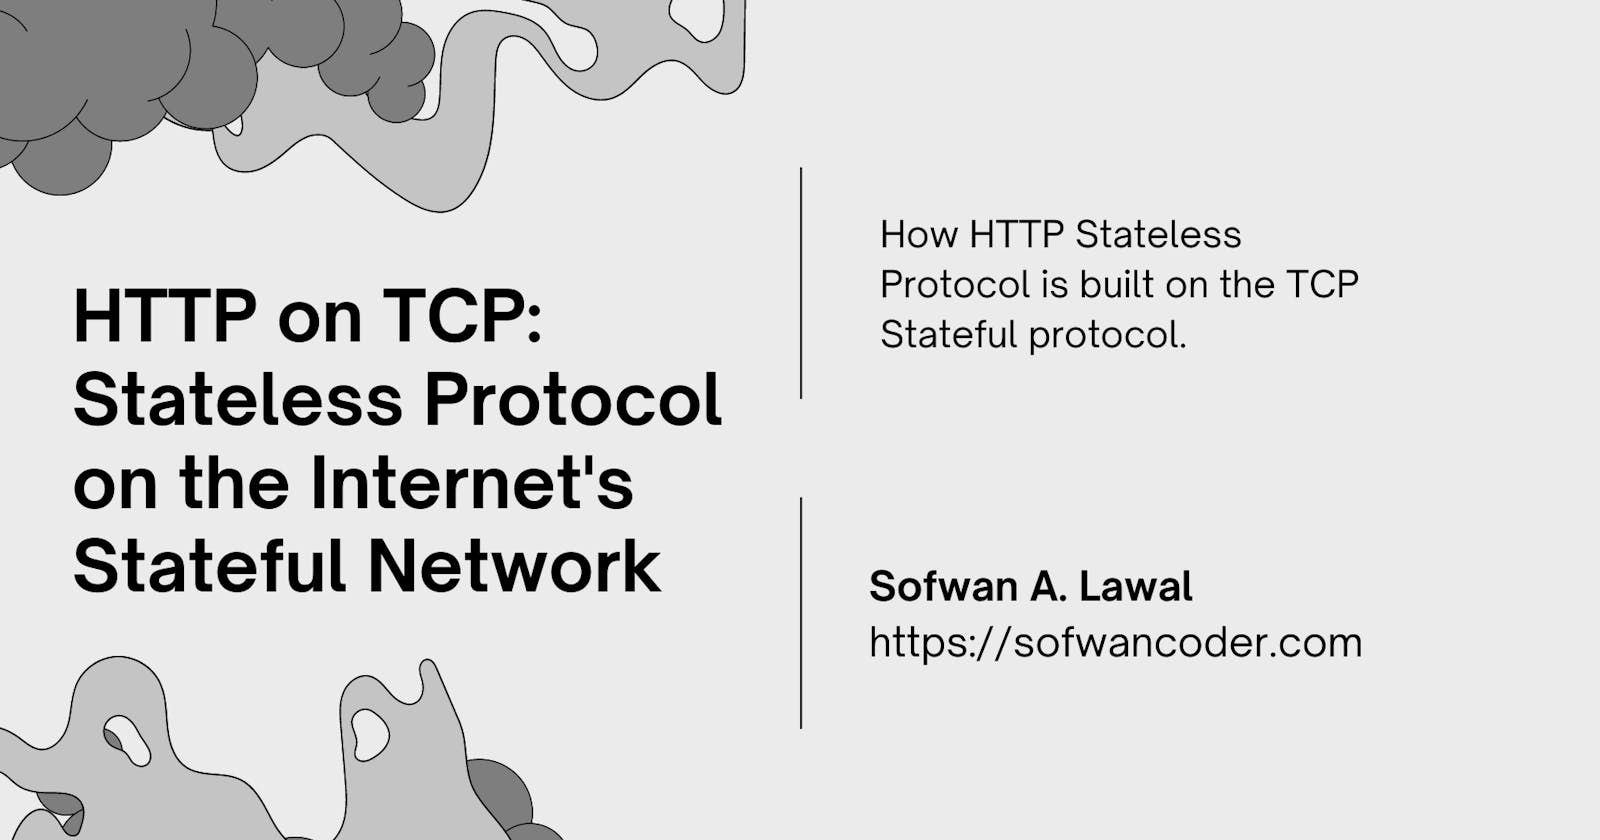 HTTP on TCP: Stateless Protocol on the Internet's Stateful Network